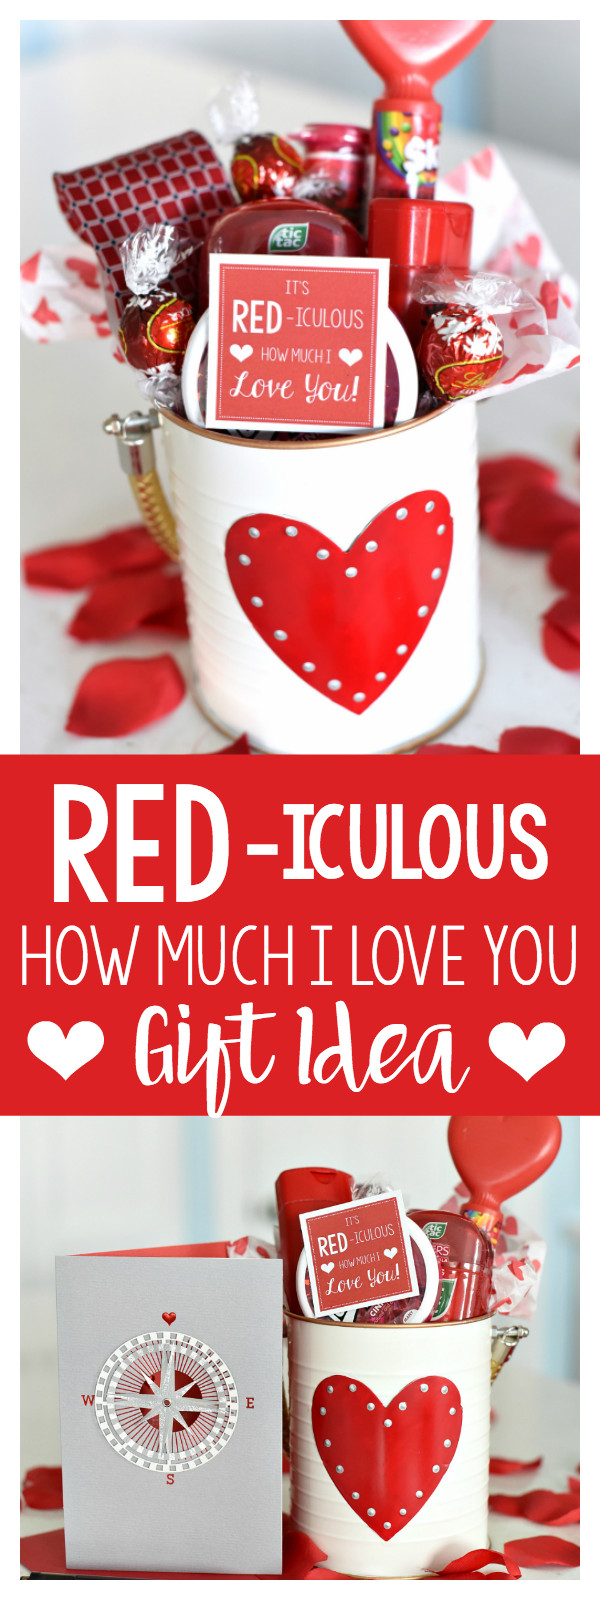 Valentine Cute Gift Ideas
 Cute Valentine s Day Gift Idea RED iculous Basket